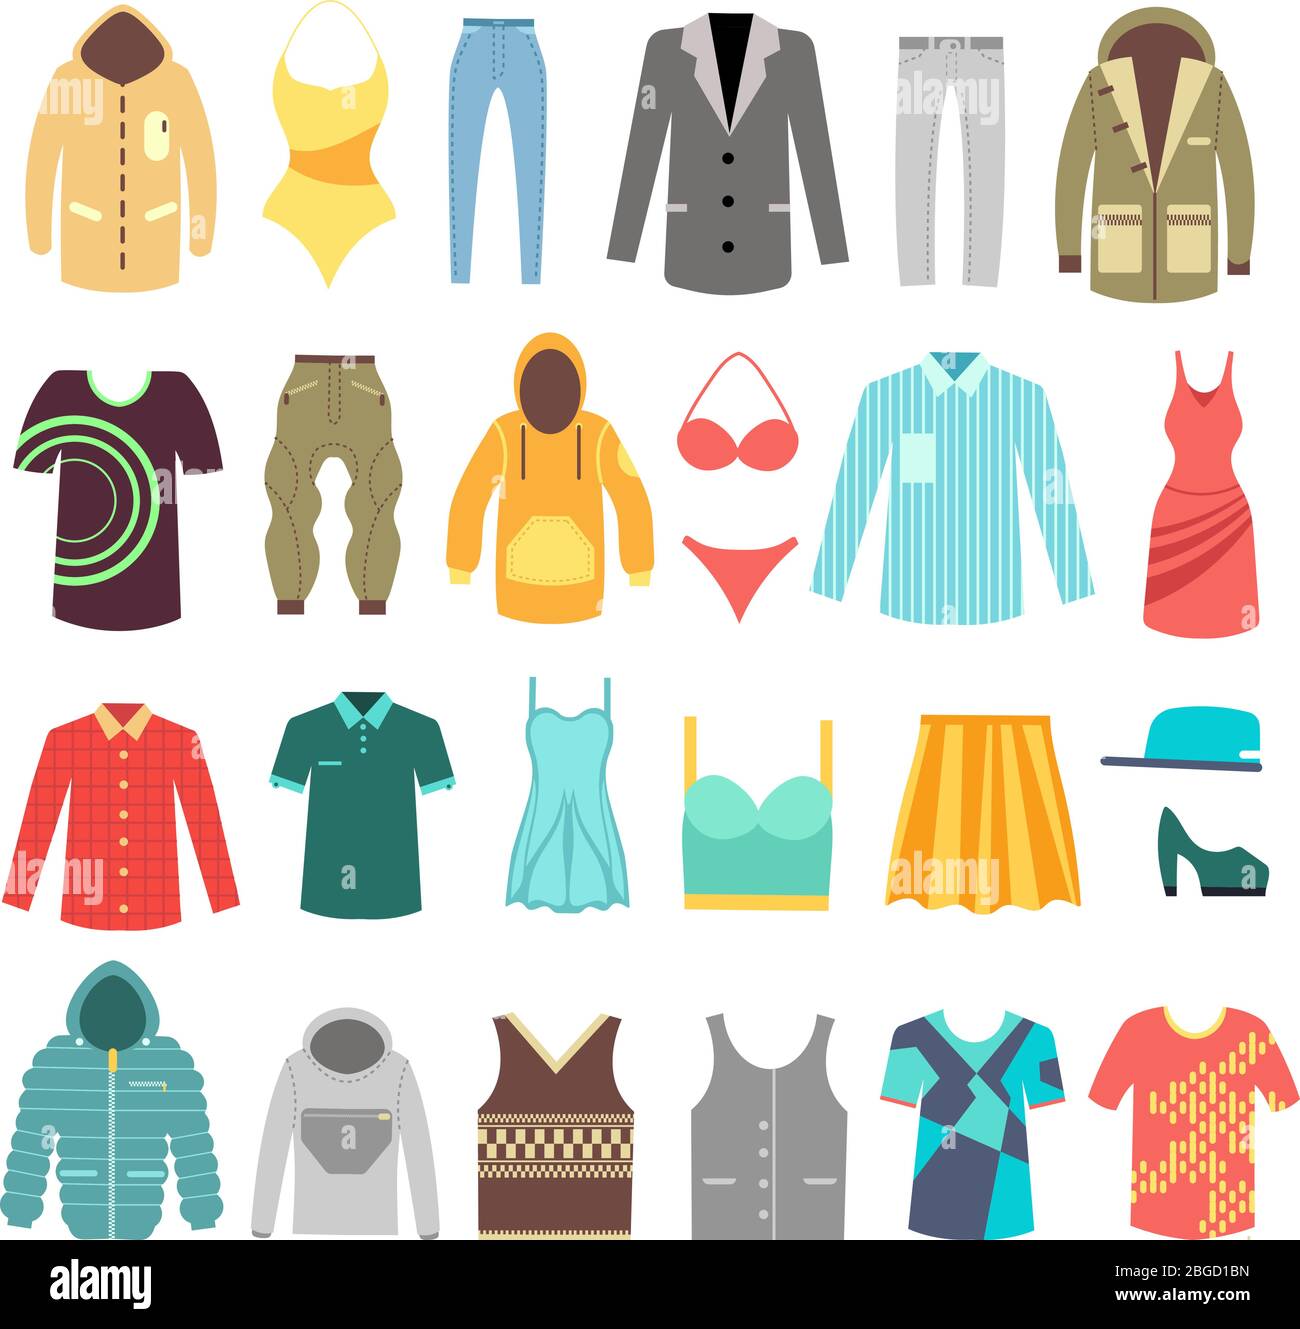 https://c8.alamy.com/comp/2BGD1BN/modern-stylish-man-and-woman-clothes-shoes-and-accessories-vector-icons-illustration-of-fashion-dress-and-clothing-shirt-and-clothes-2BGD1BN.jpg